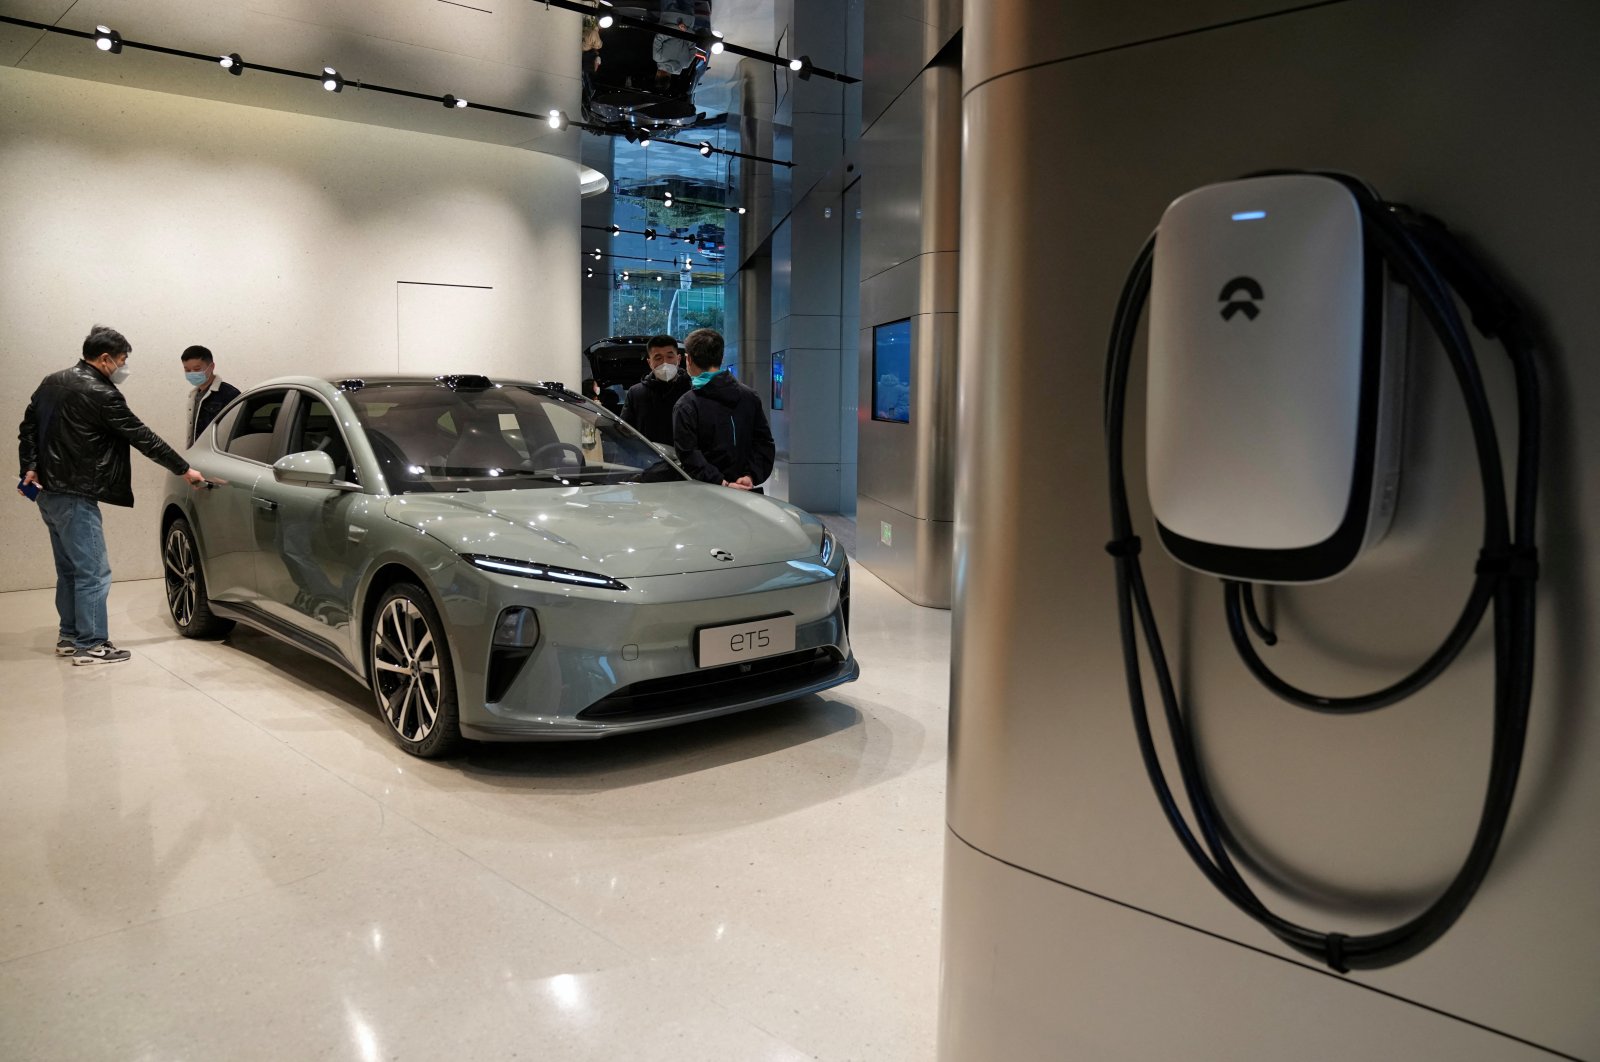 A Nio ET5 electric vehicle is displayed at the Chinese EV maker&#039;s showroom in Shanghai, China, Feb. 3, 2023. (Reuters Photo)